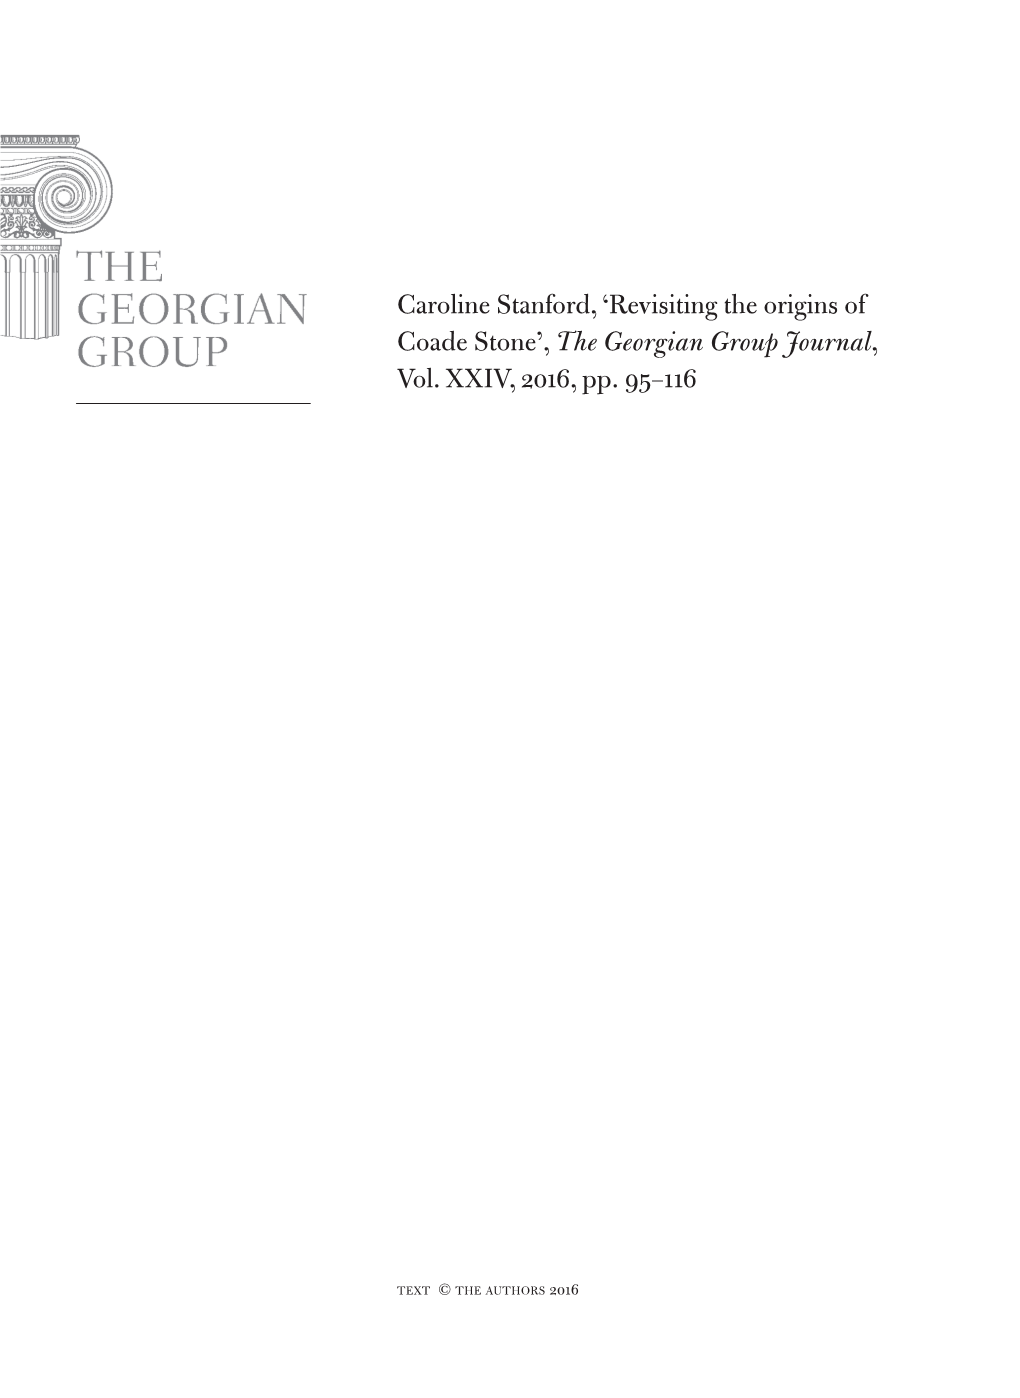 Revisiting the Origins of Coade Stone’, the Georgian Group Journal, Vol